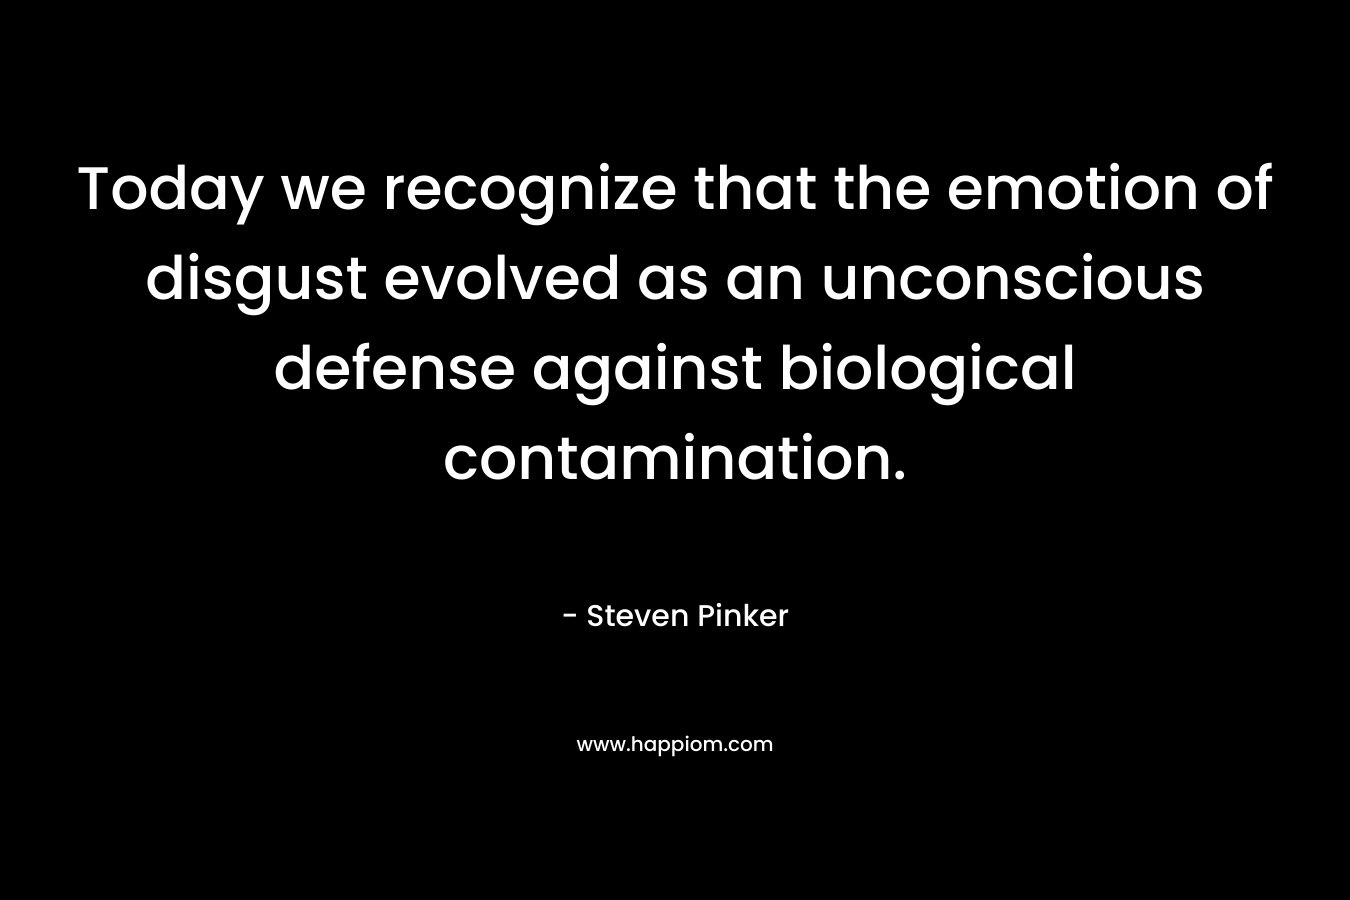 Today we recognize that the emotion of disgust evolved as an unconscious defense against biological contamination.